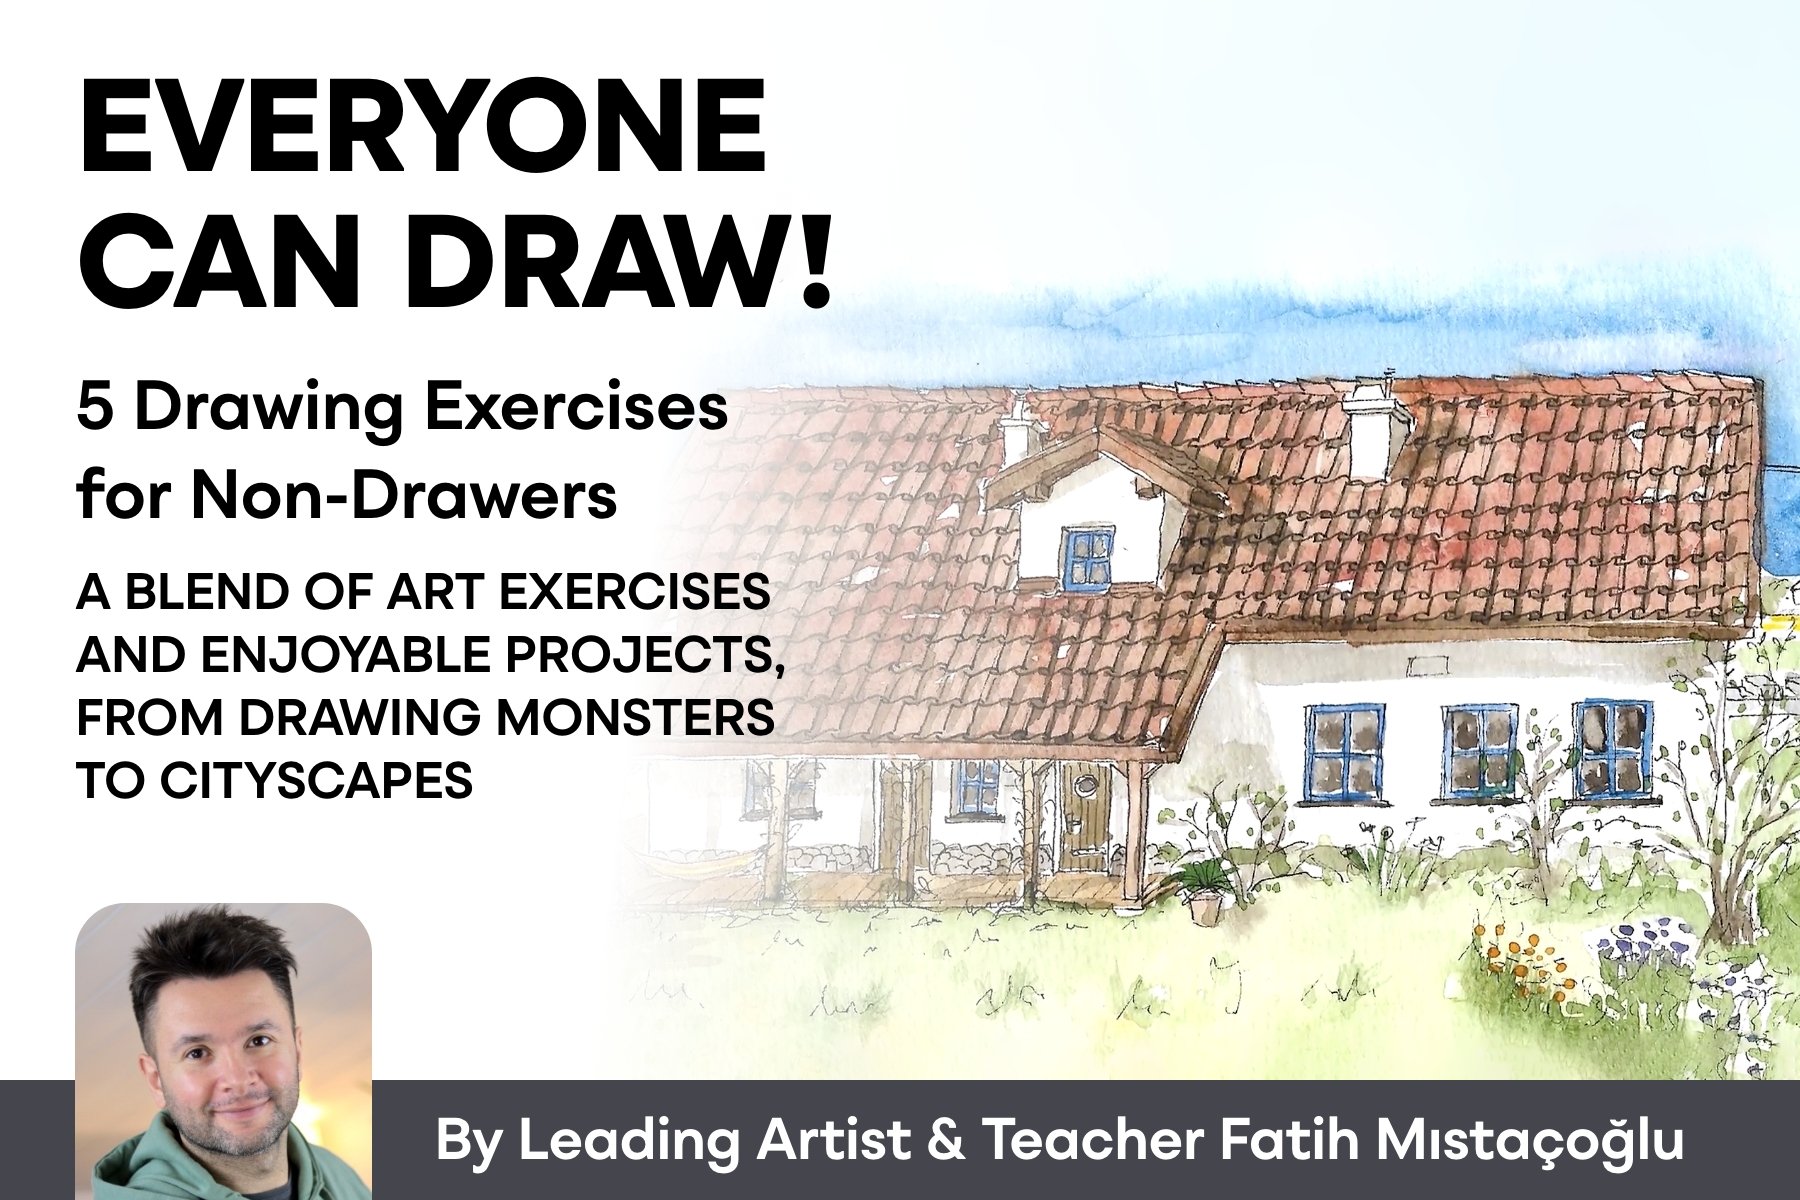 Everyone Can Draw